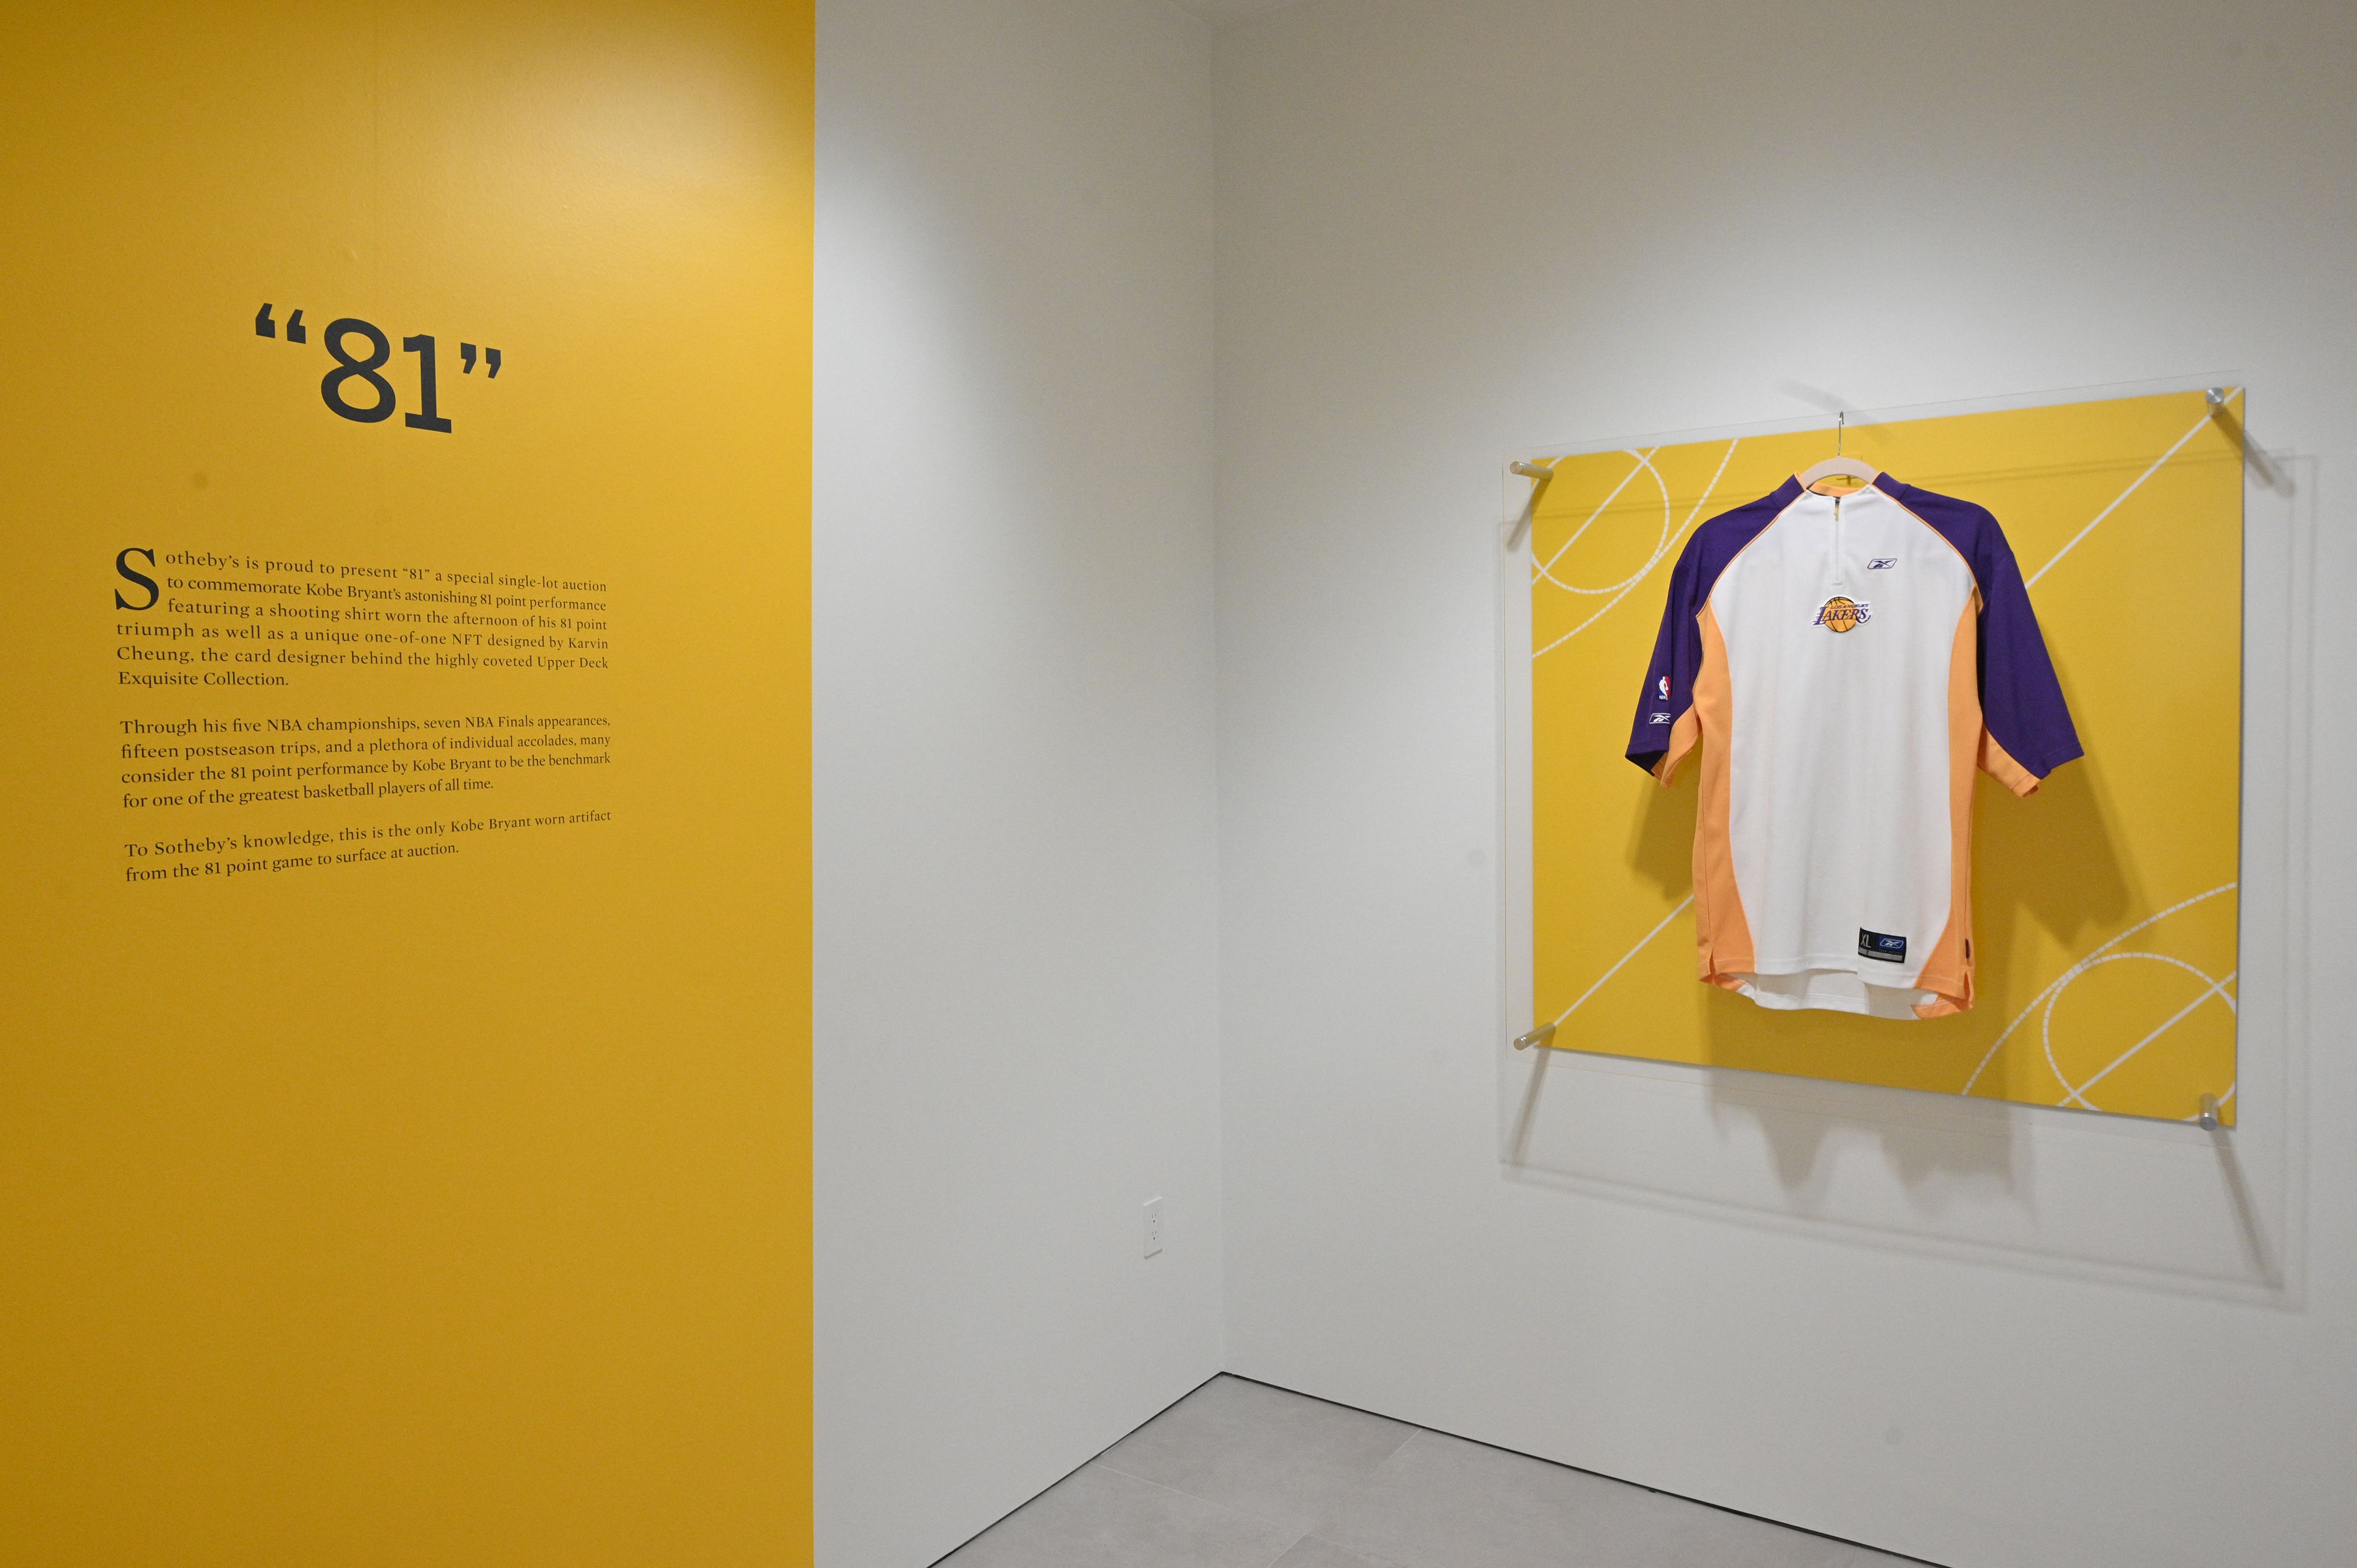 Kobe Bryant’s Lakers Shooting Shirt from 81-Point Game Sells for $277K at Auction